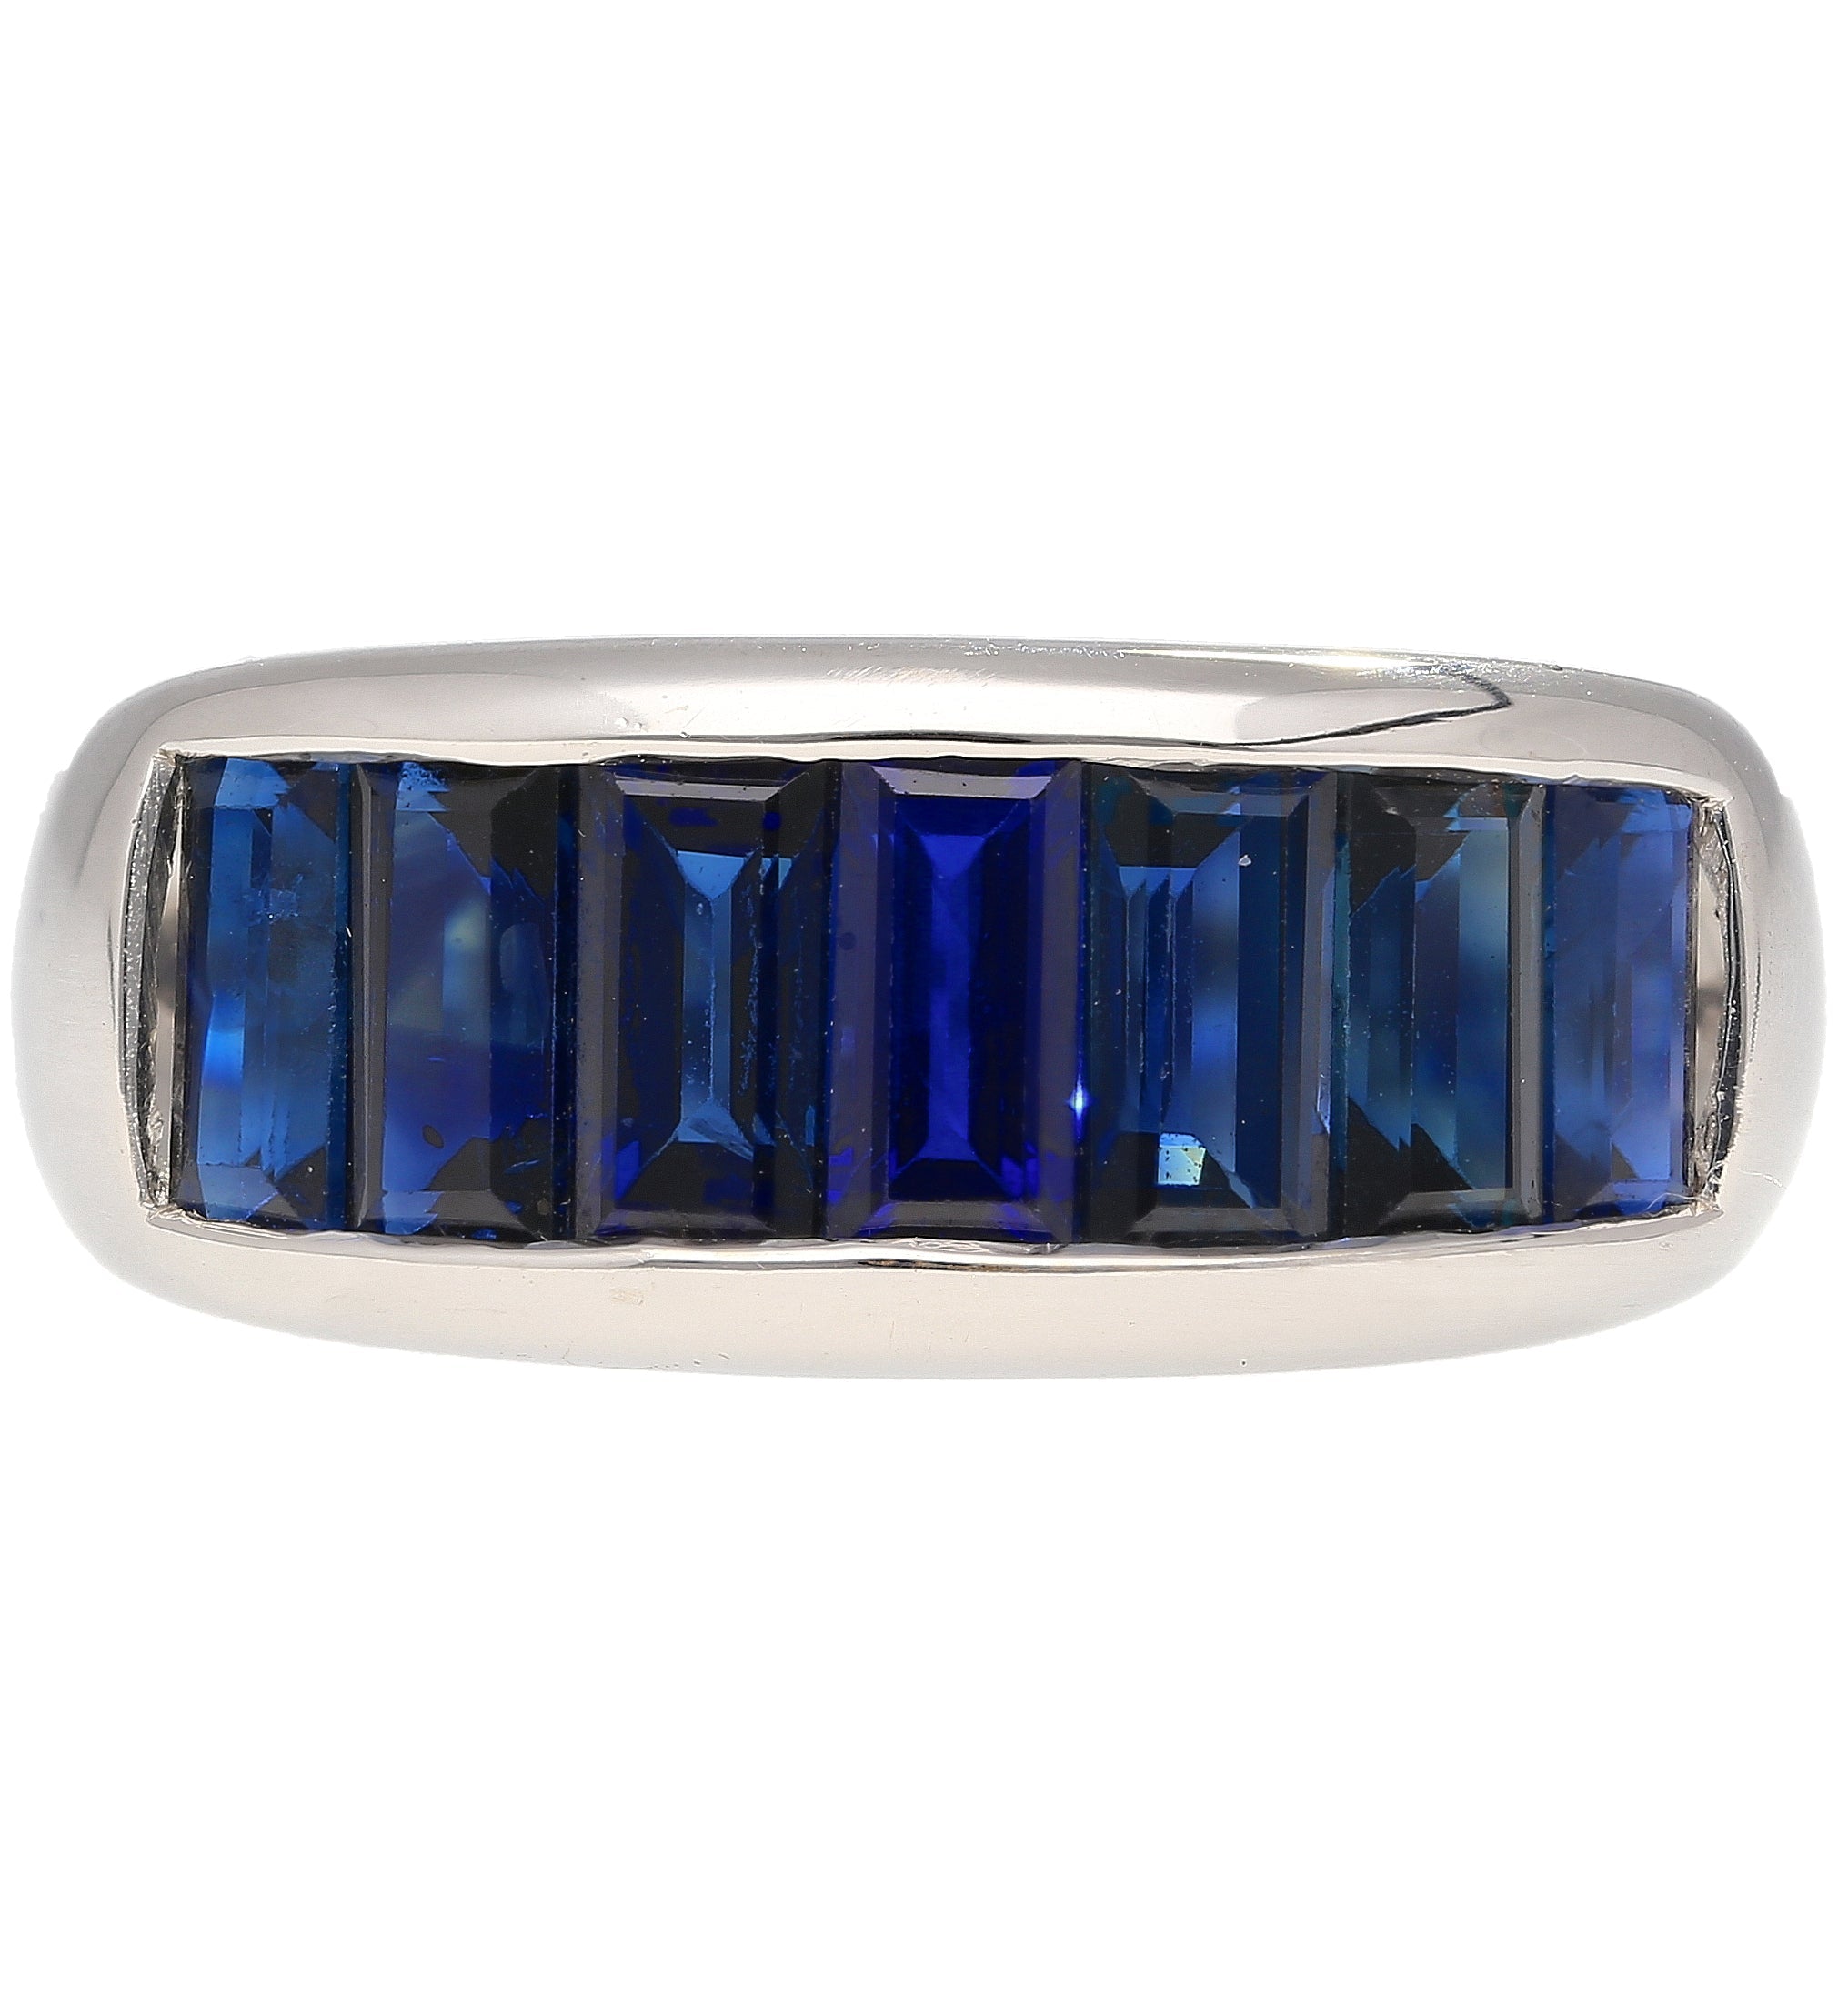 18K-Solid-White-Gold-Channel-Set-Baguette-Cut-Blue-Sapphire-Band-Ring-Band.jpg